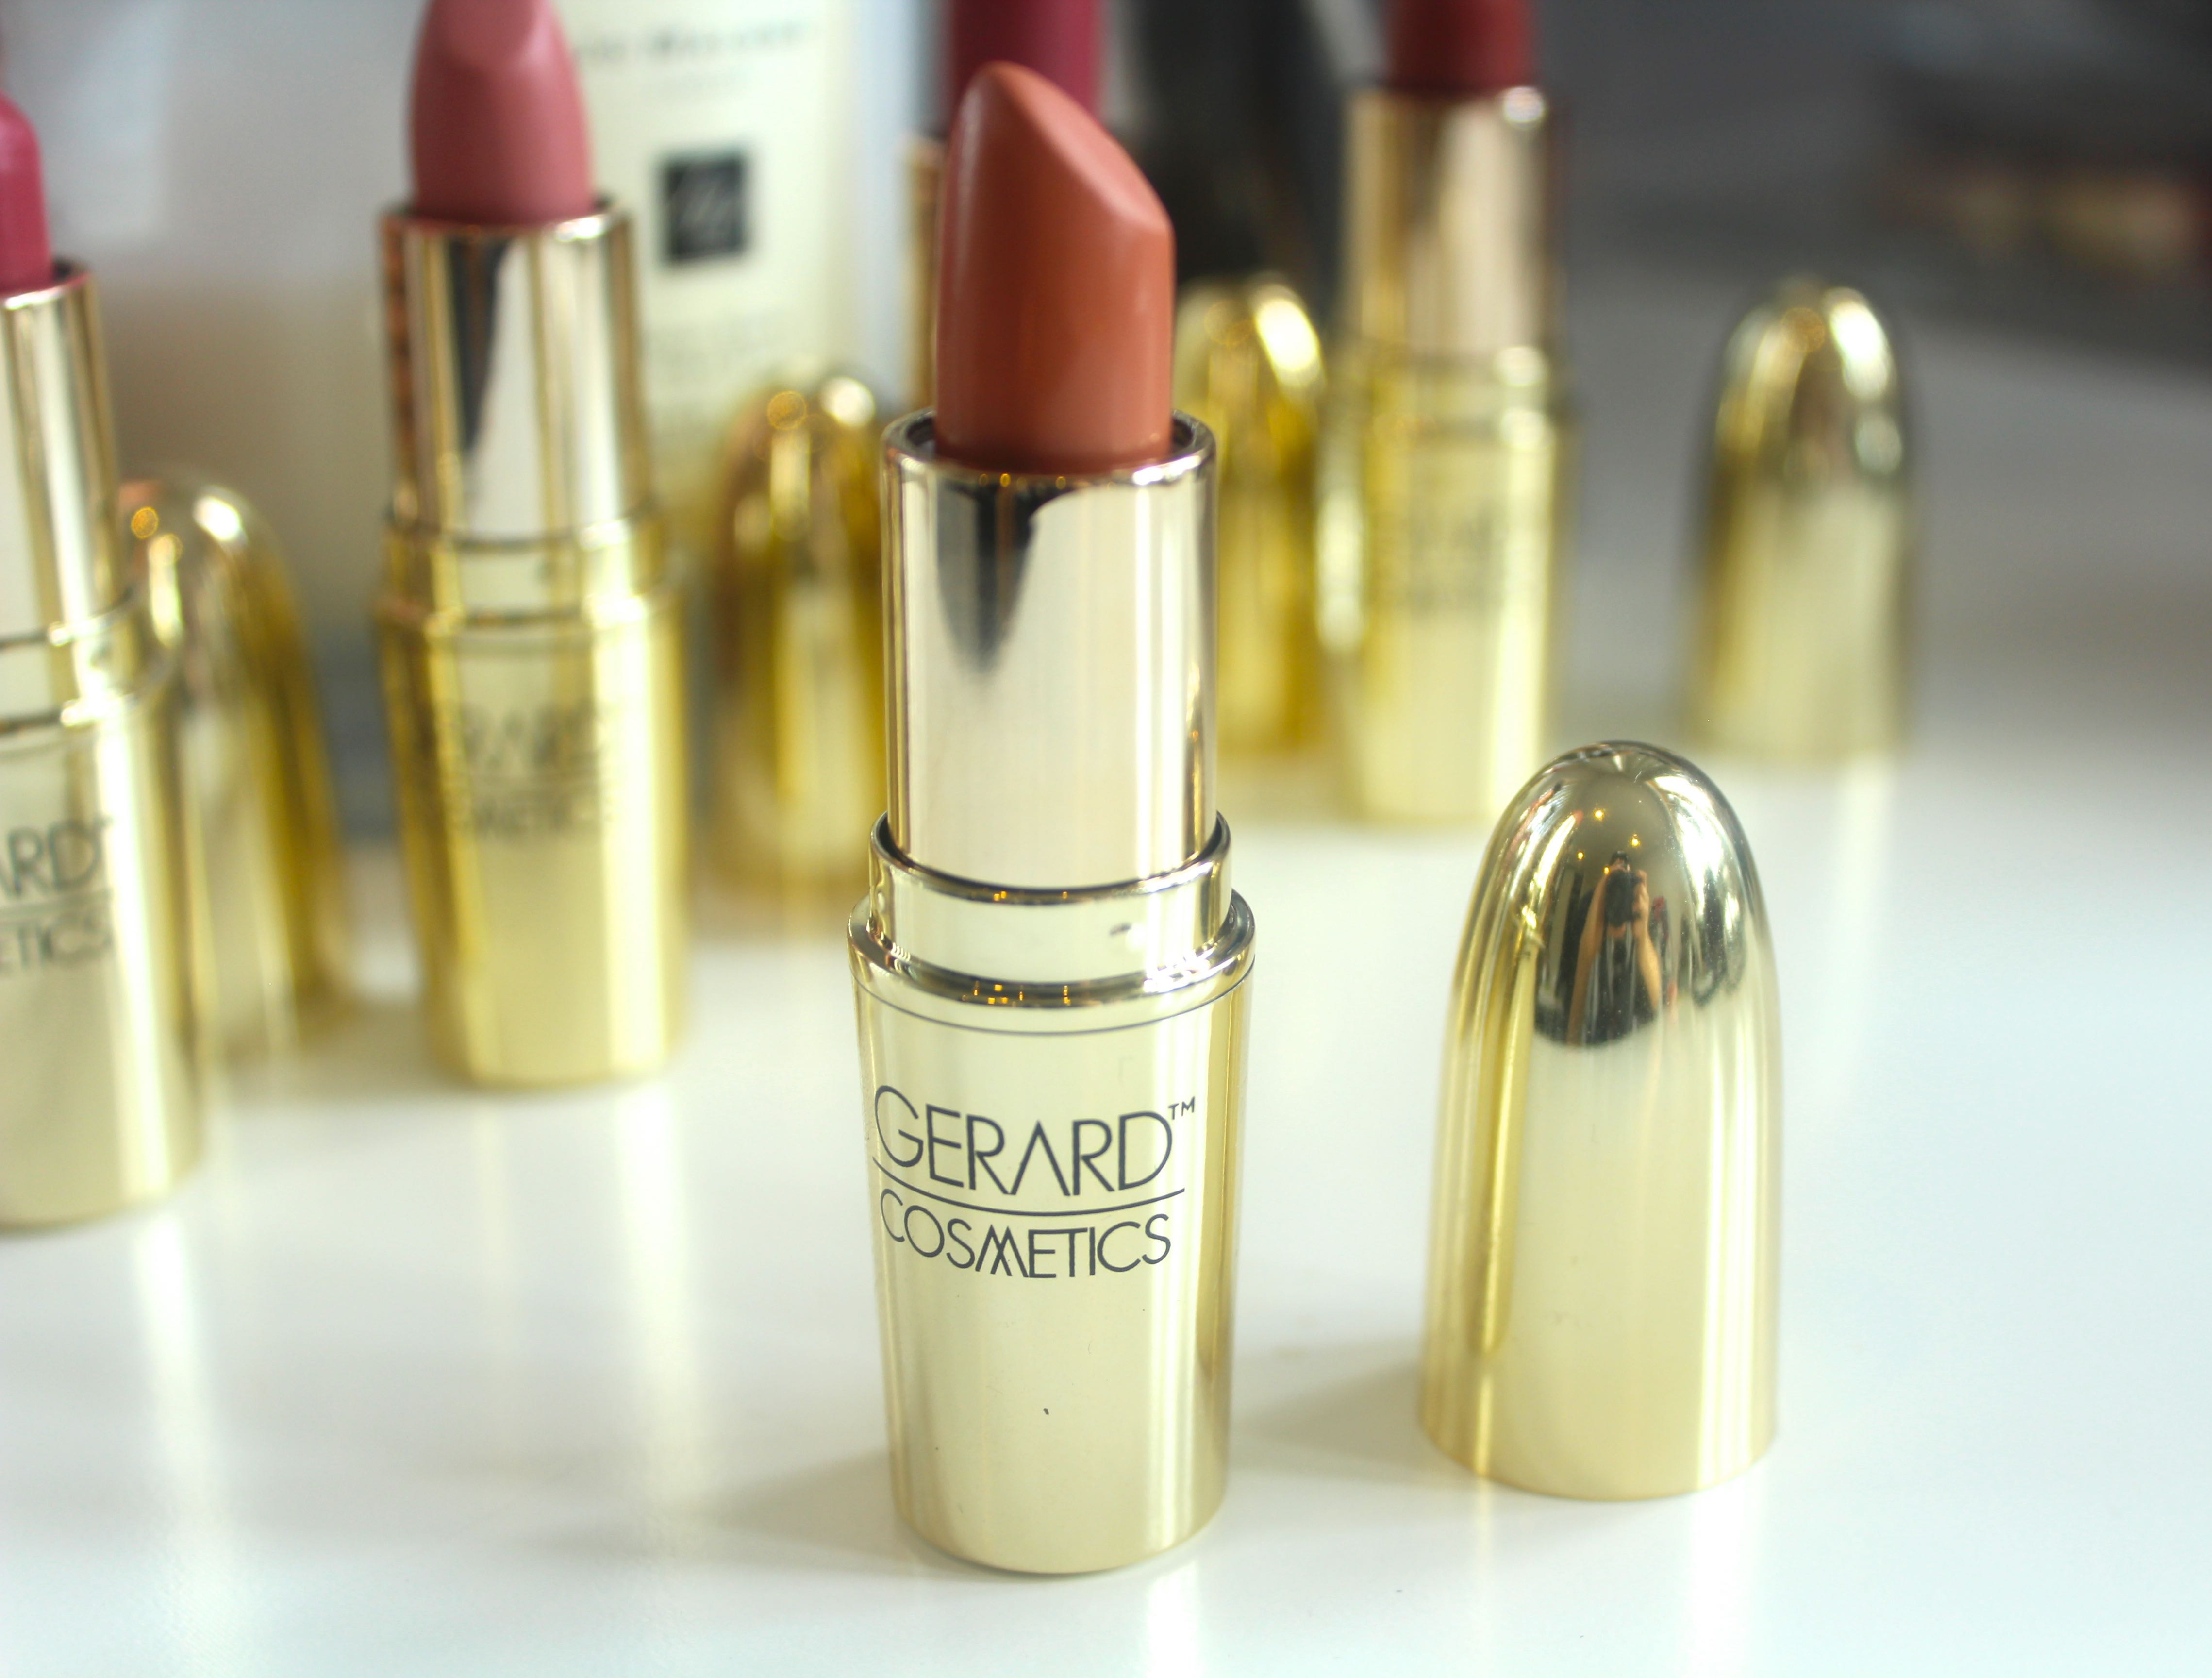 Gerard Lipsticks Nude Review by Face Made Up